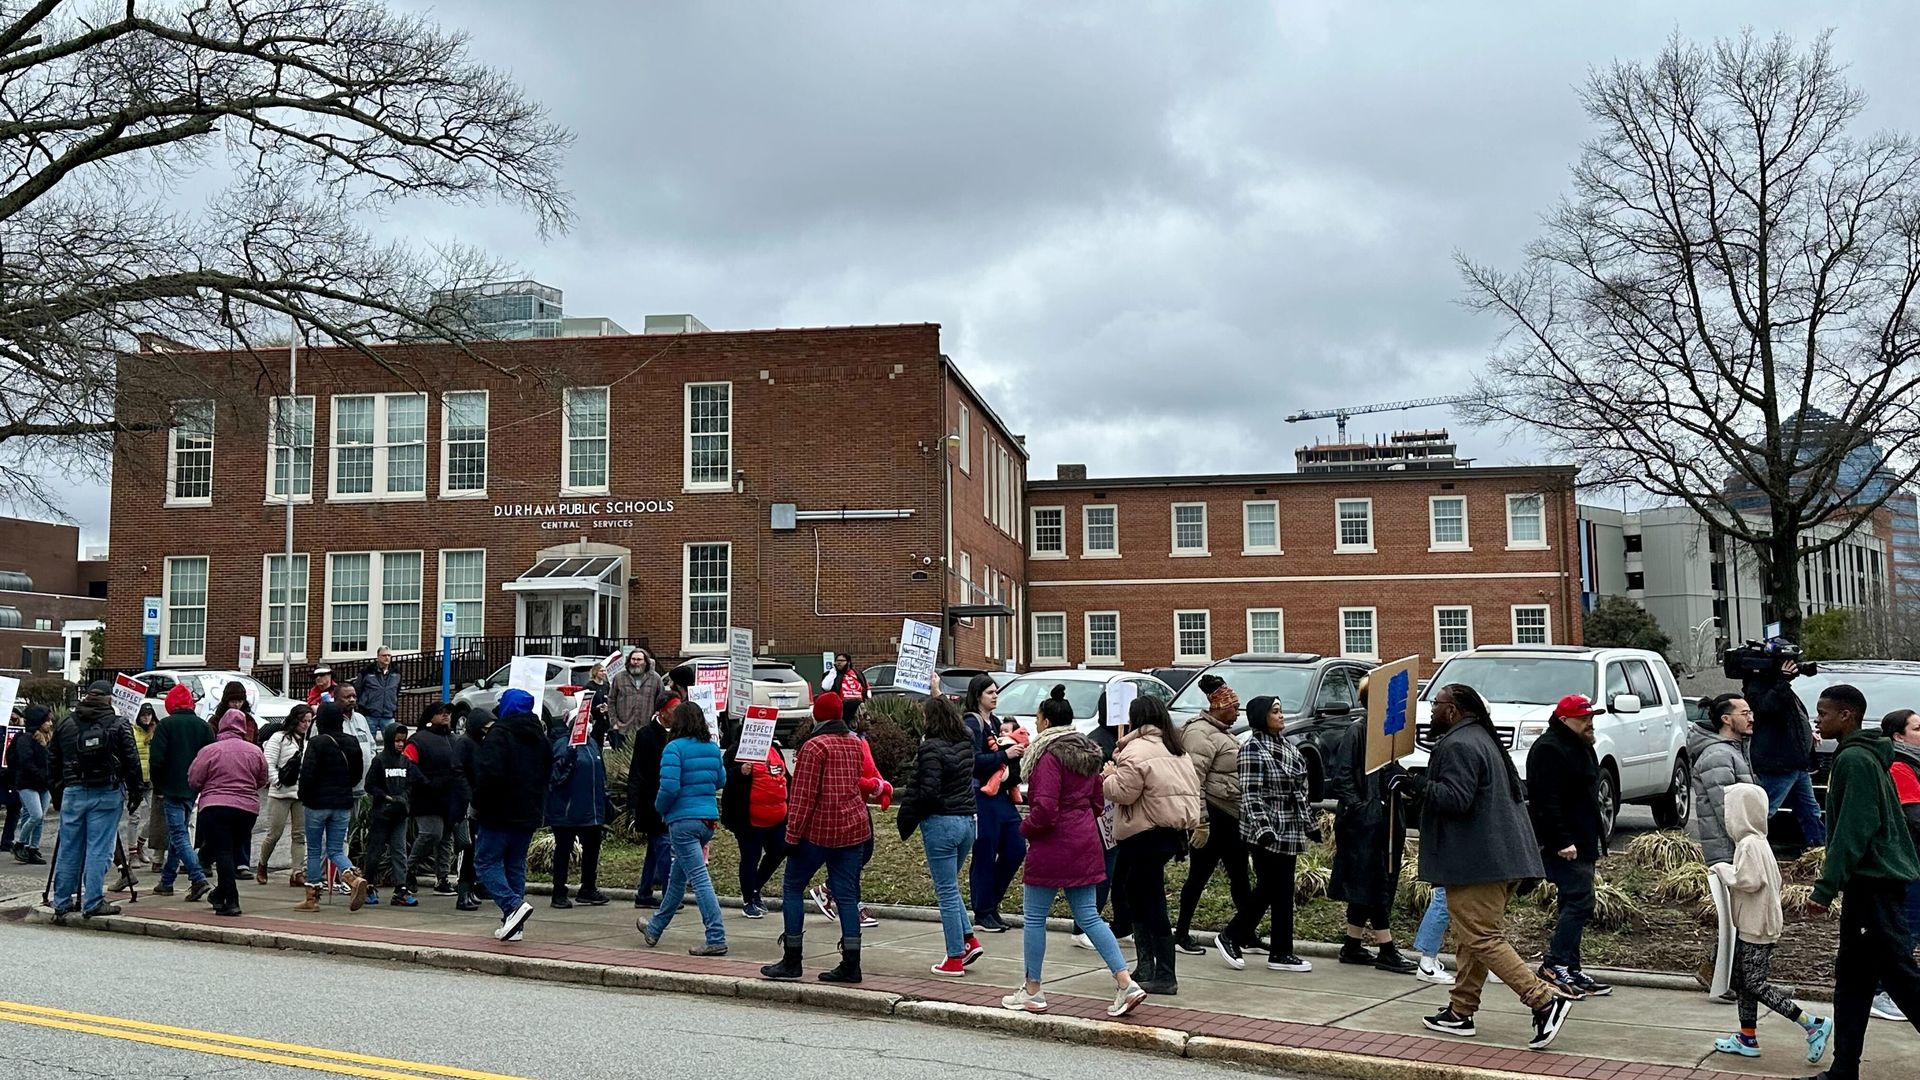 Dozens of protesters marching with signs in front of the Durham Public Schools administrative building